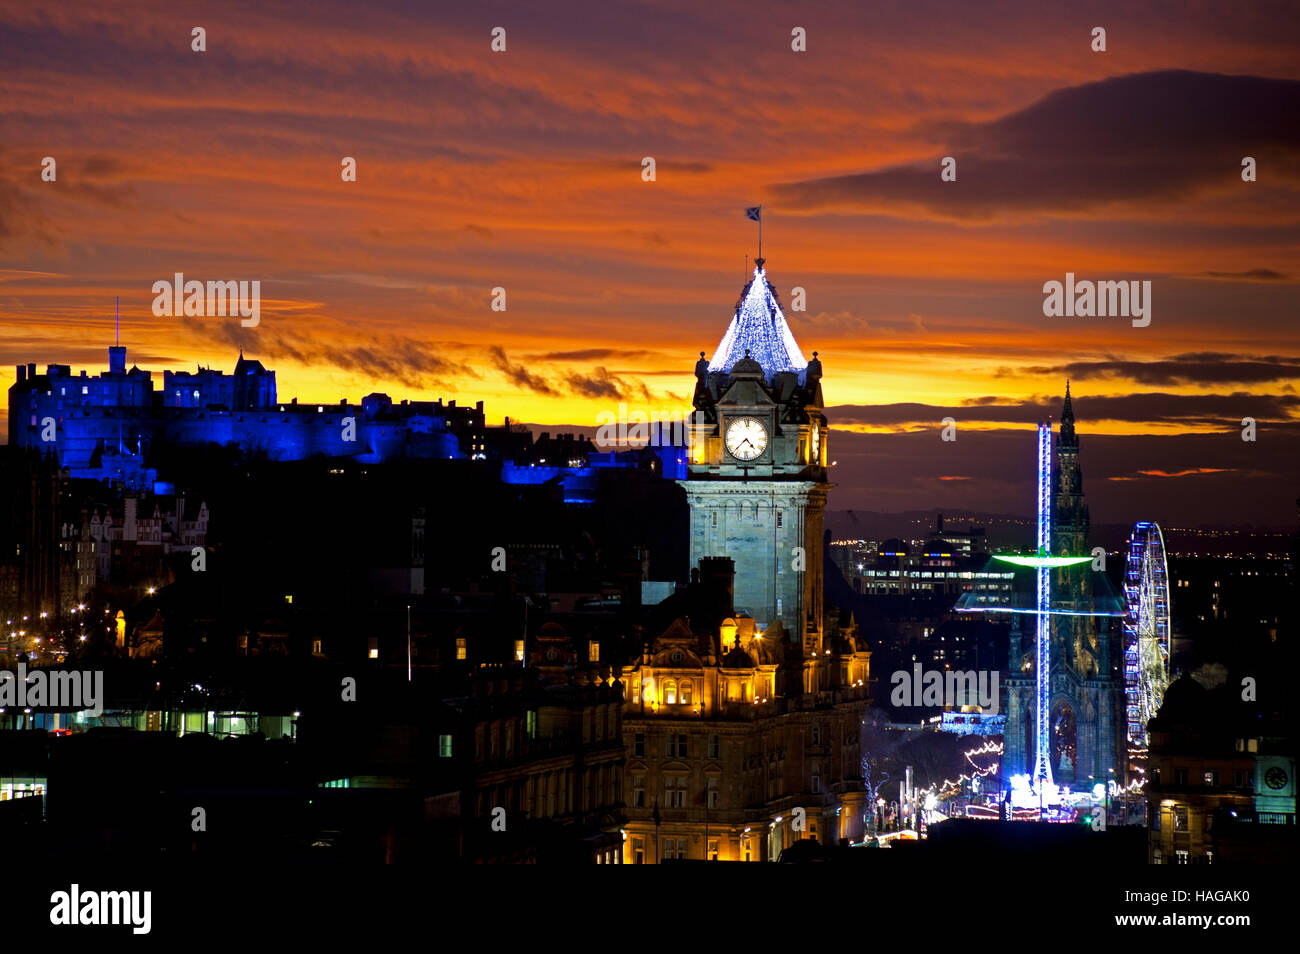 Edinburgh city from Calton Hill, Scotland. 30th Nov, 2016. St Andrew's Day is the national day in Scotland. Historic buildings such as the castle were bathed in a blue hue, plus a spectacular sunset. Stock Photo